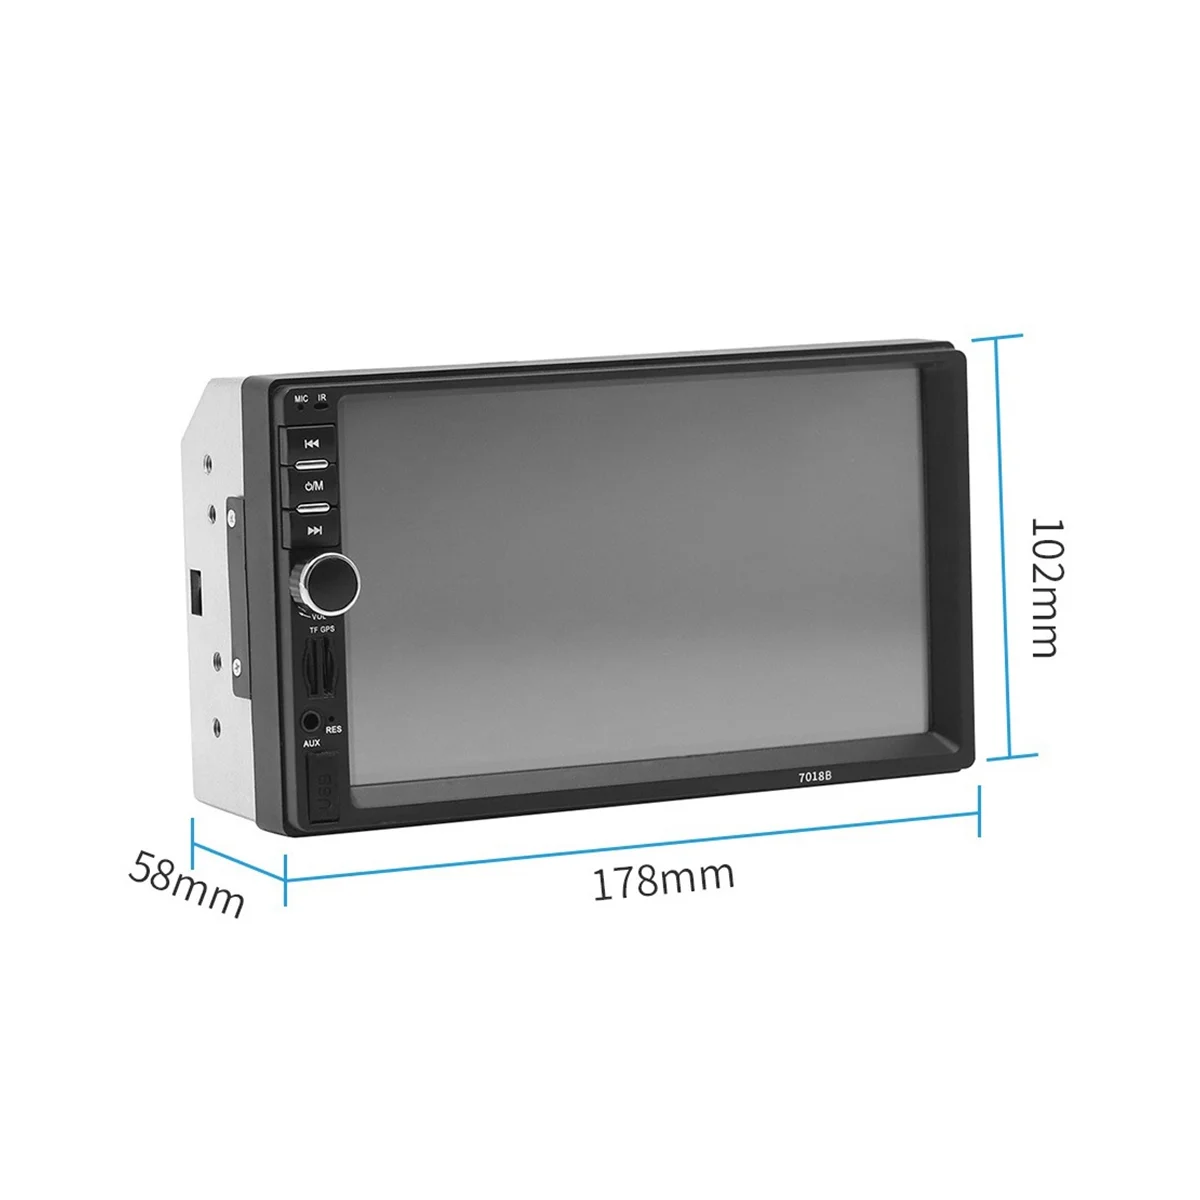 

Universal 7Inch 2 Din Car Radio Recorder Player Touch Screen Stereo MP5 Bluetooth Multimedia Player with Camera 7018B